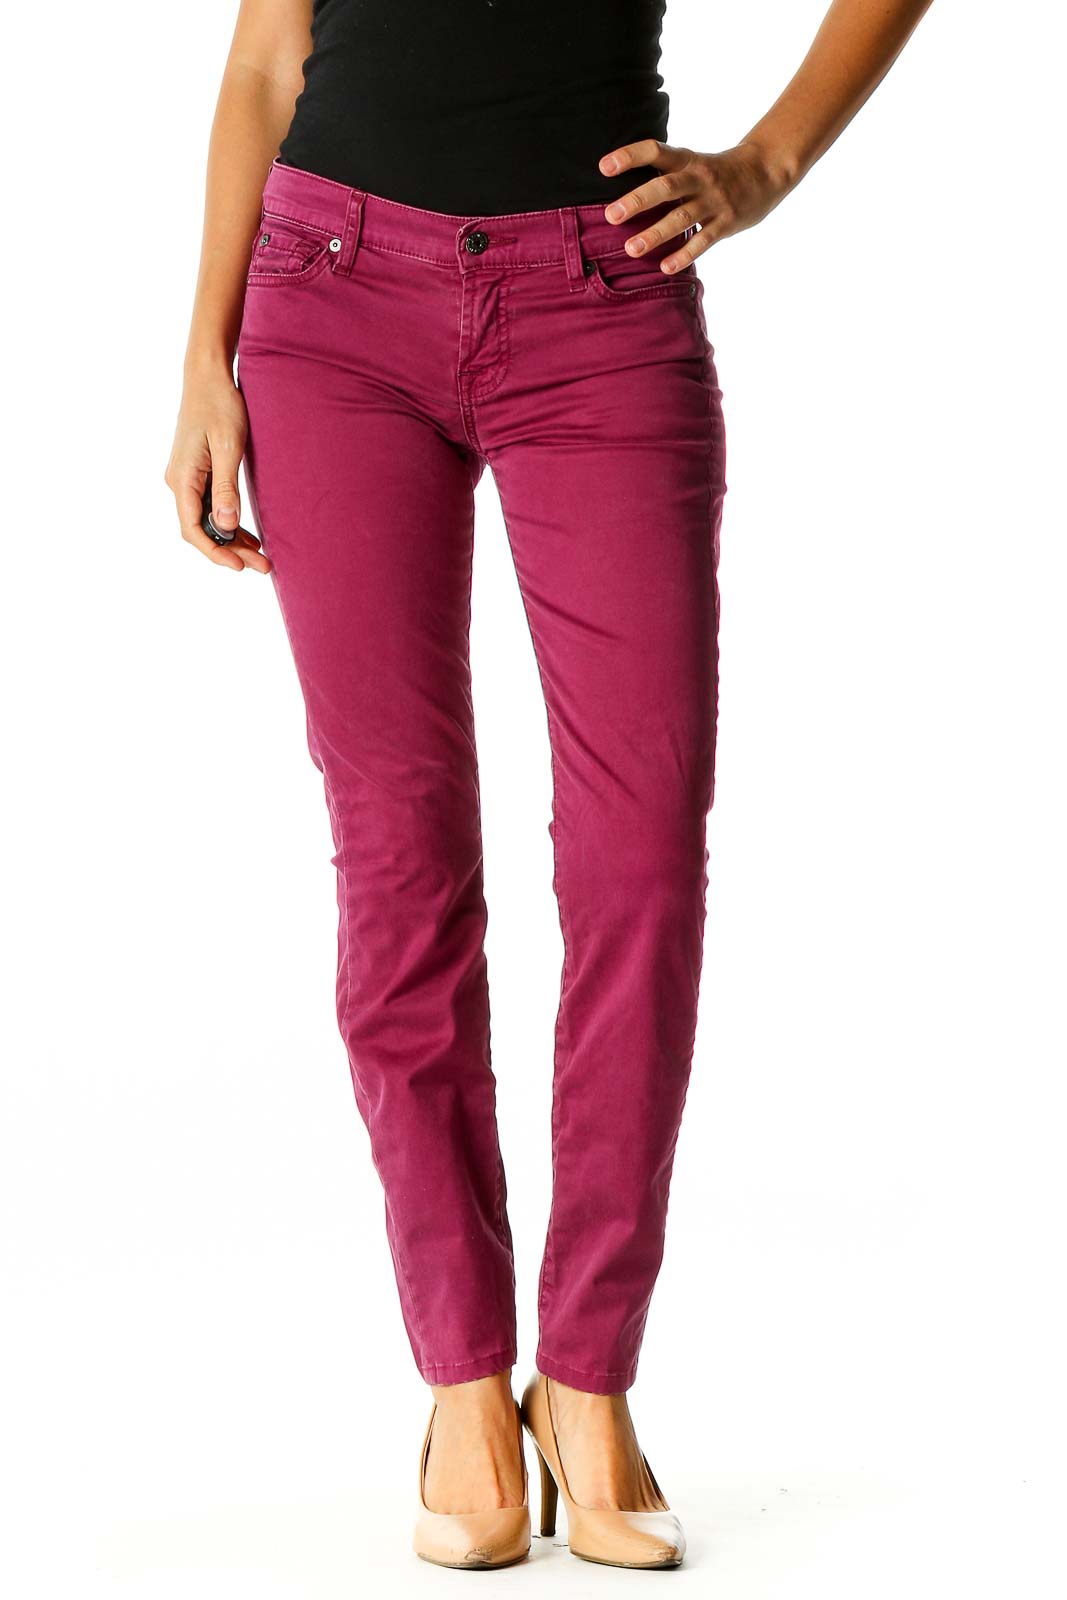 Pink Solid Casual Jeans Front